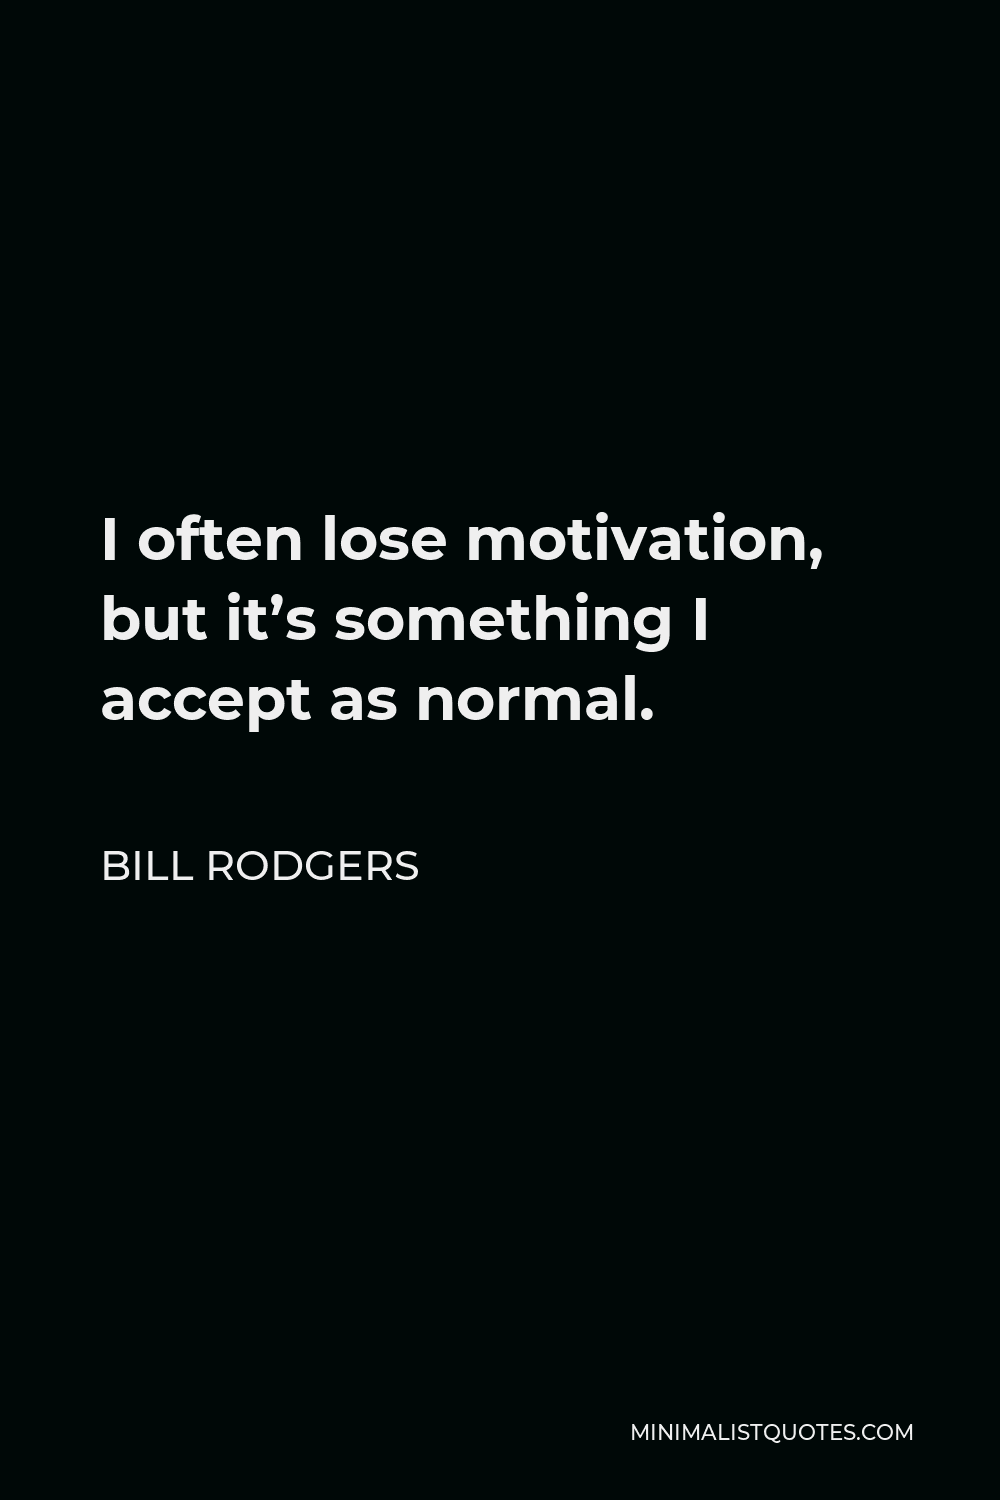 Bill Rodgers Quote - I often lose motivation, but it’s something I accept as normal.